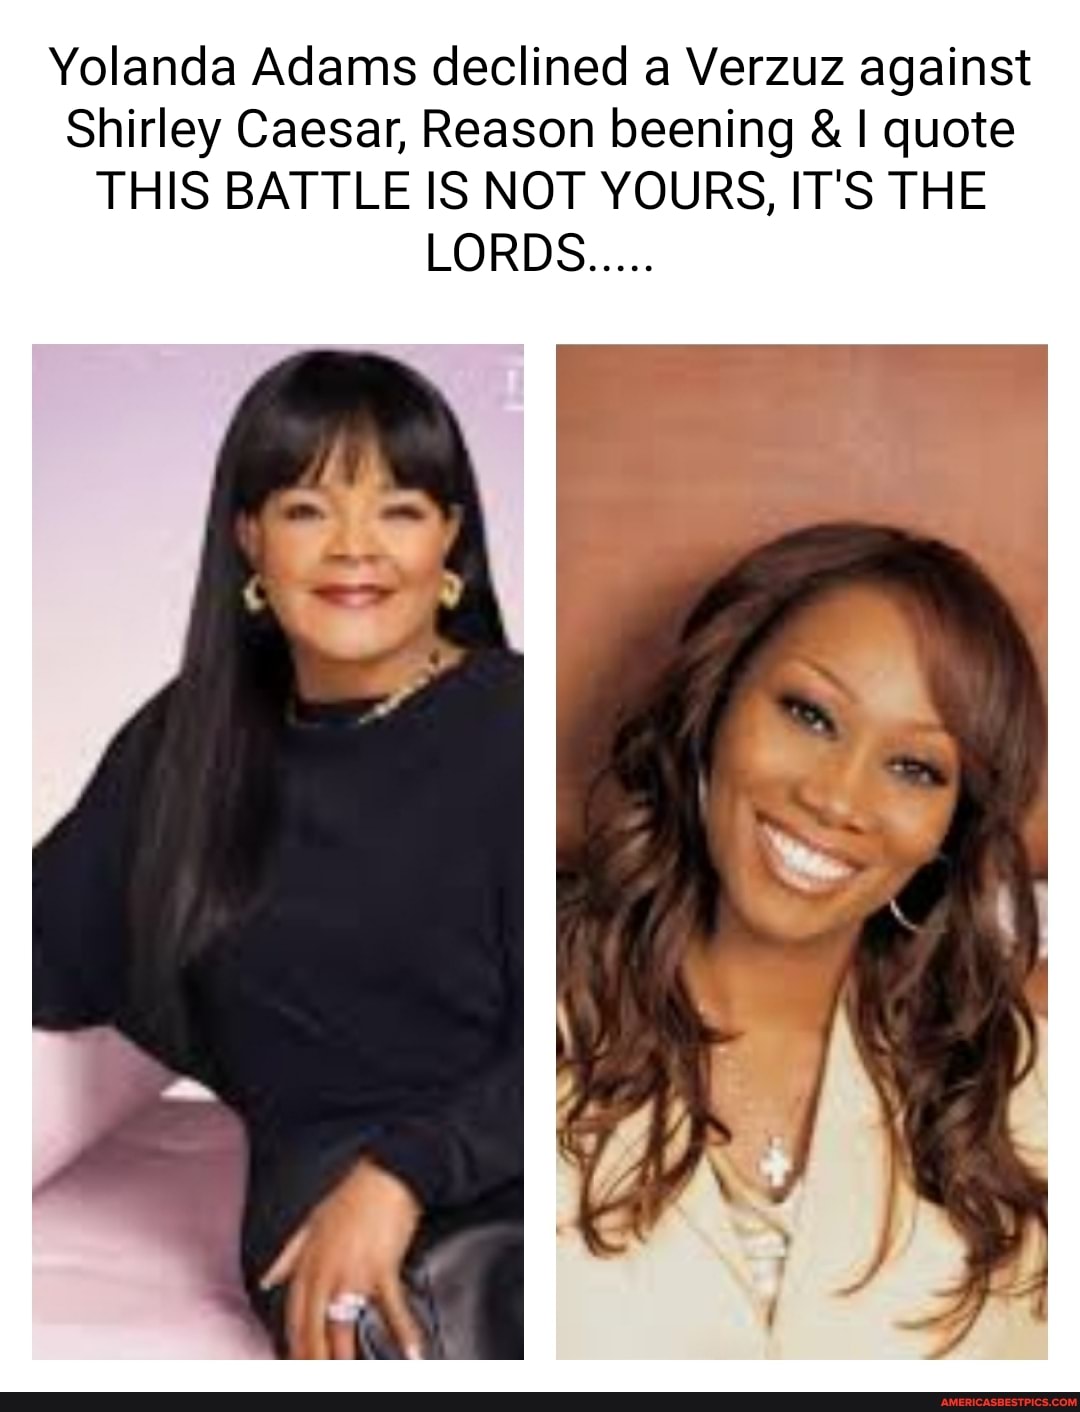 yolanda adams the battle is not yours extended version